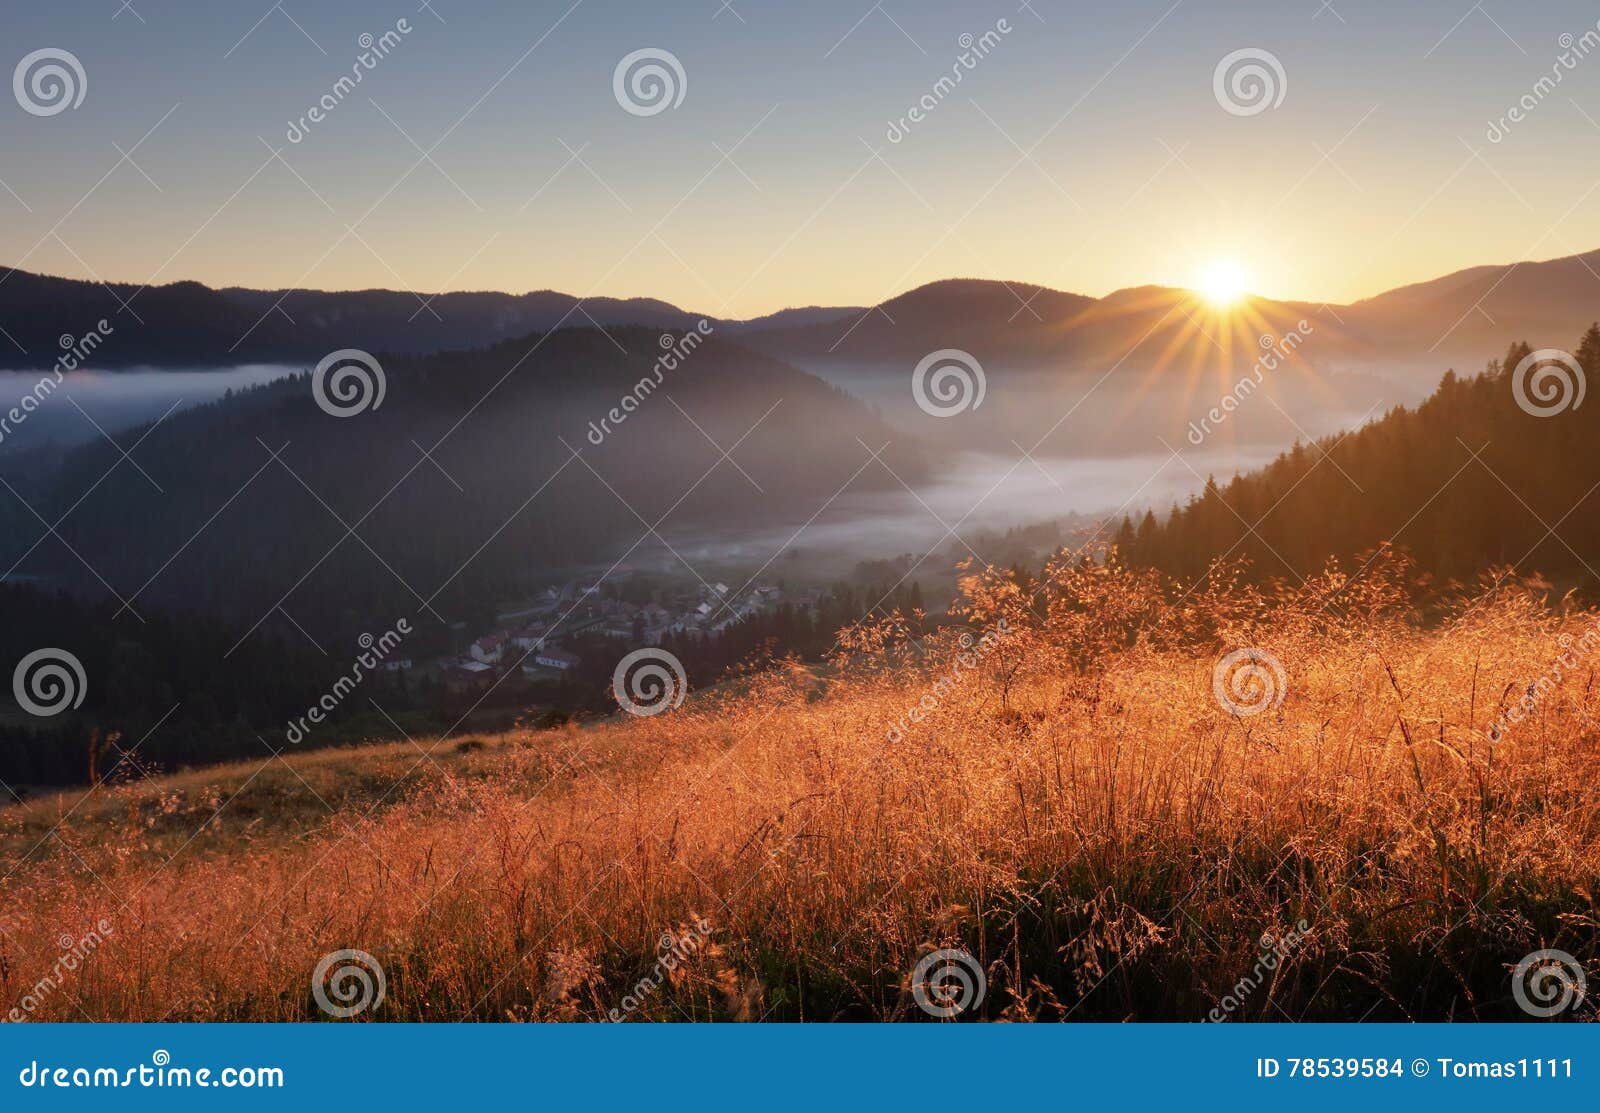 landcape with sun, meadow, forest and mountain